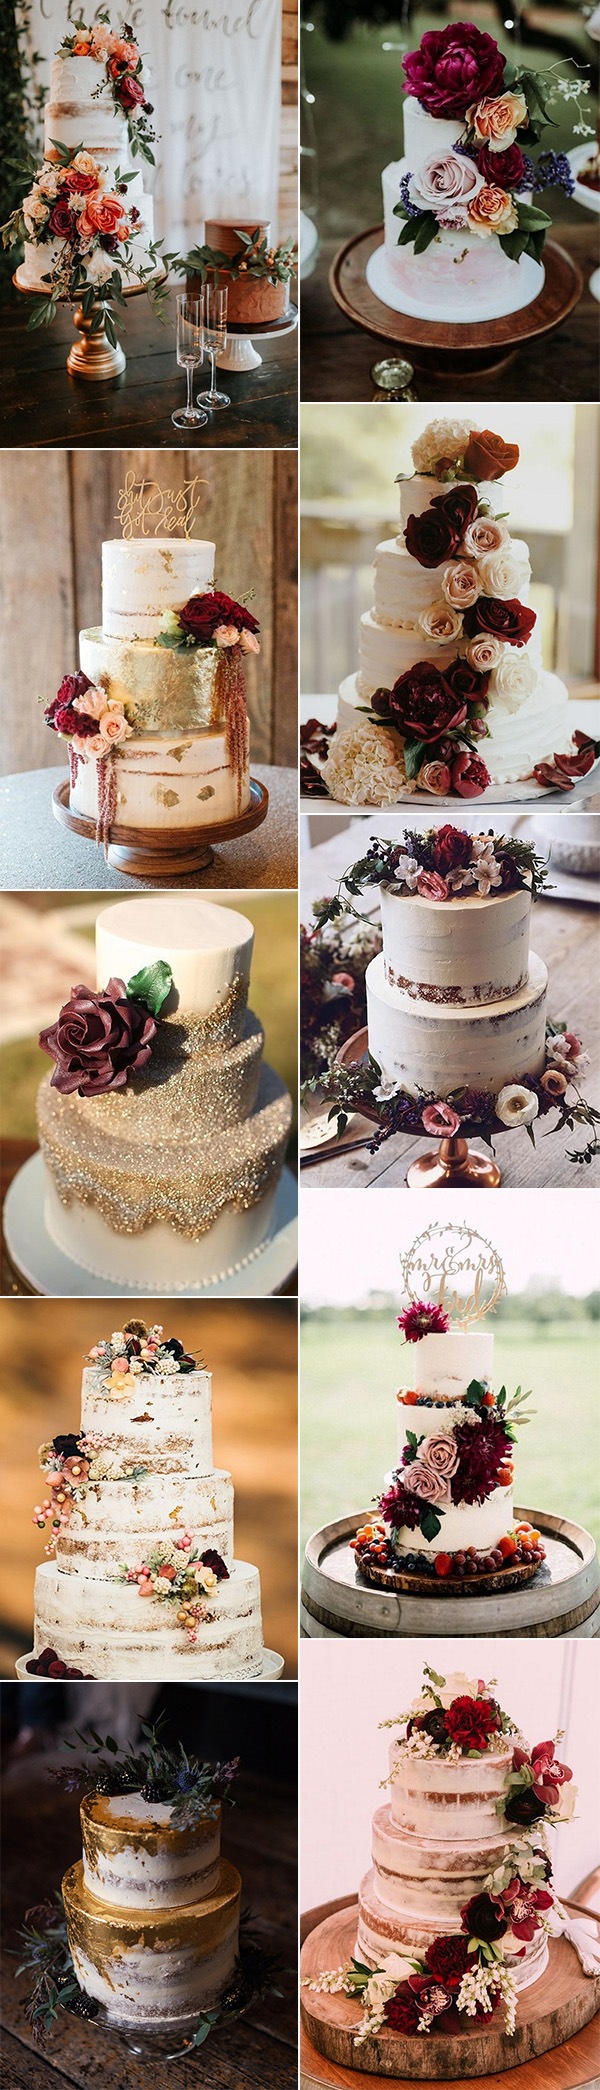 trending fall wedding cake ideas for 2018 and 2019